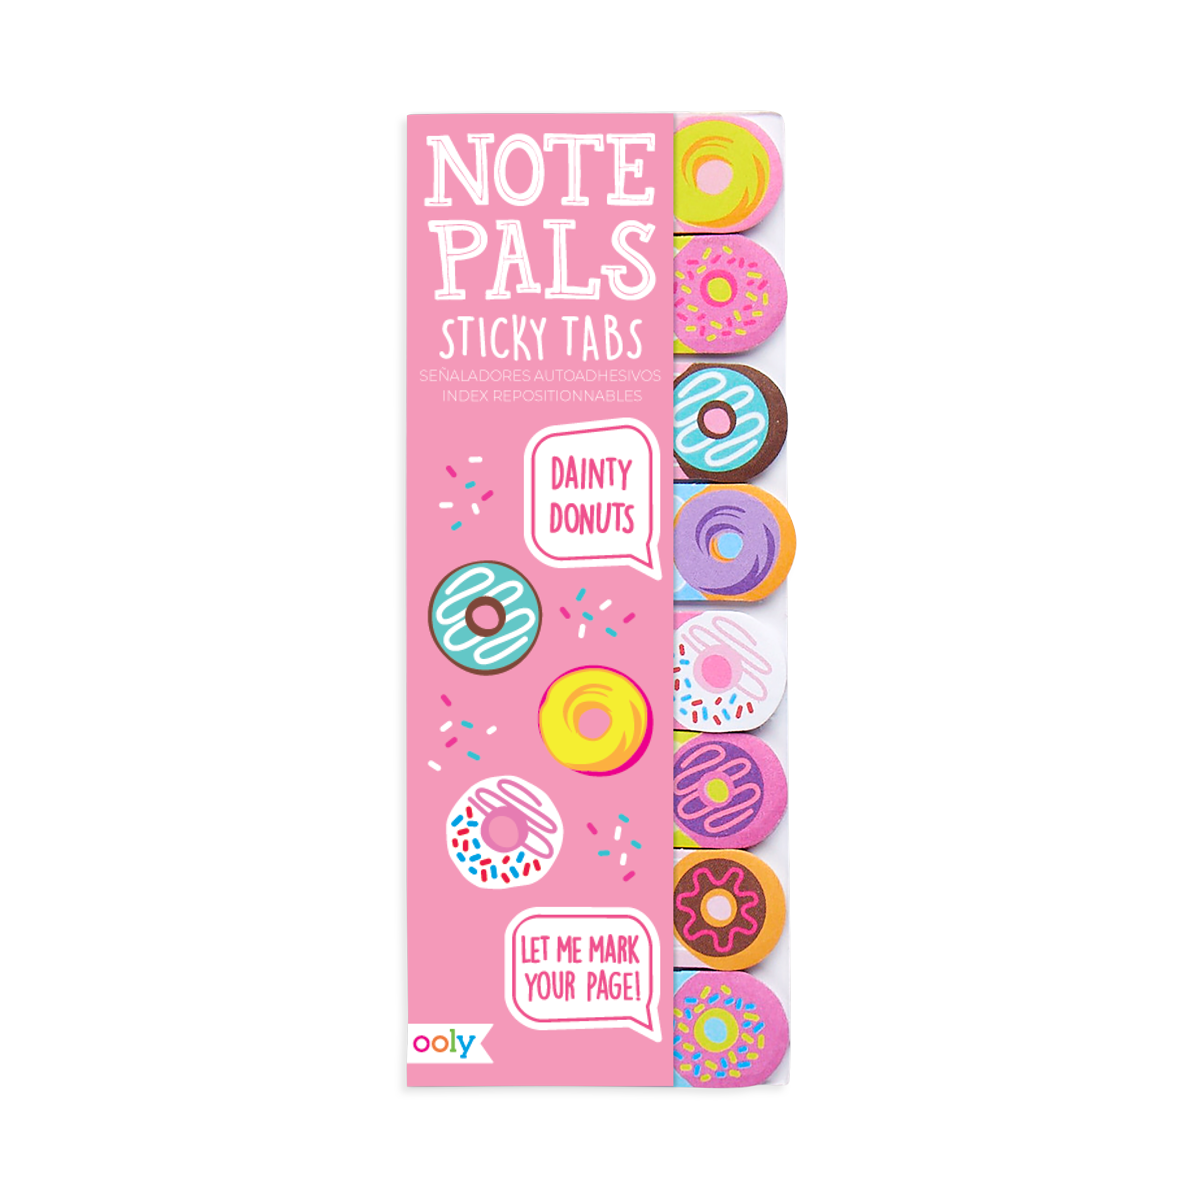 OOLY Note Pals Sticky Tabs - Dainty Donuts in packaging